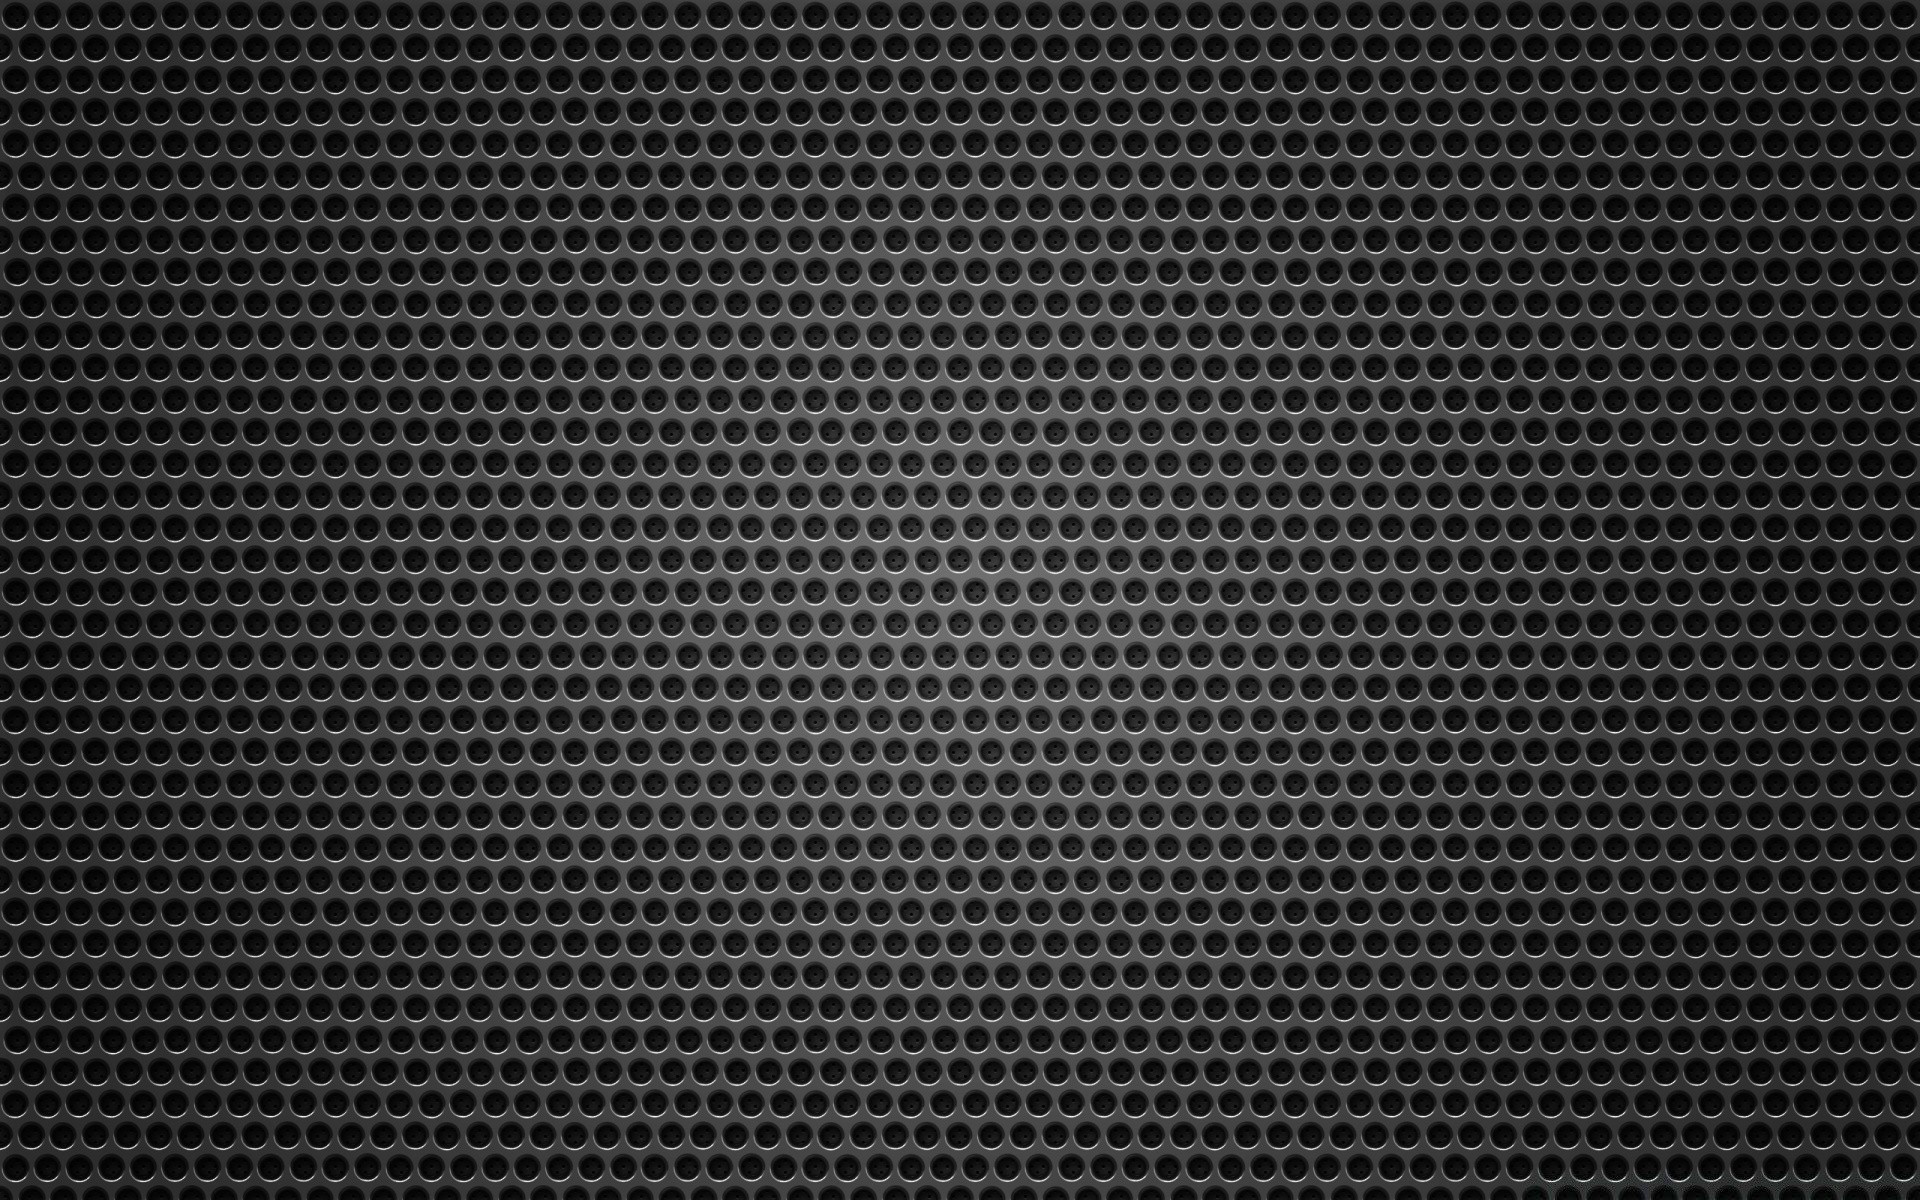 black design wallpaper desktop pattern net texture background abstract fabric weaving luxury seamless cover surface iron steel textile leather retro